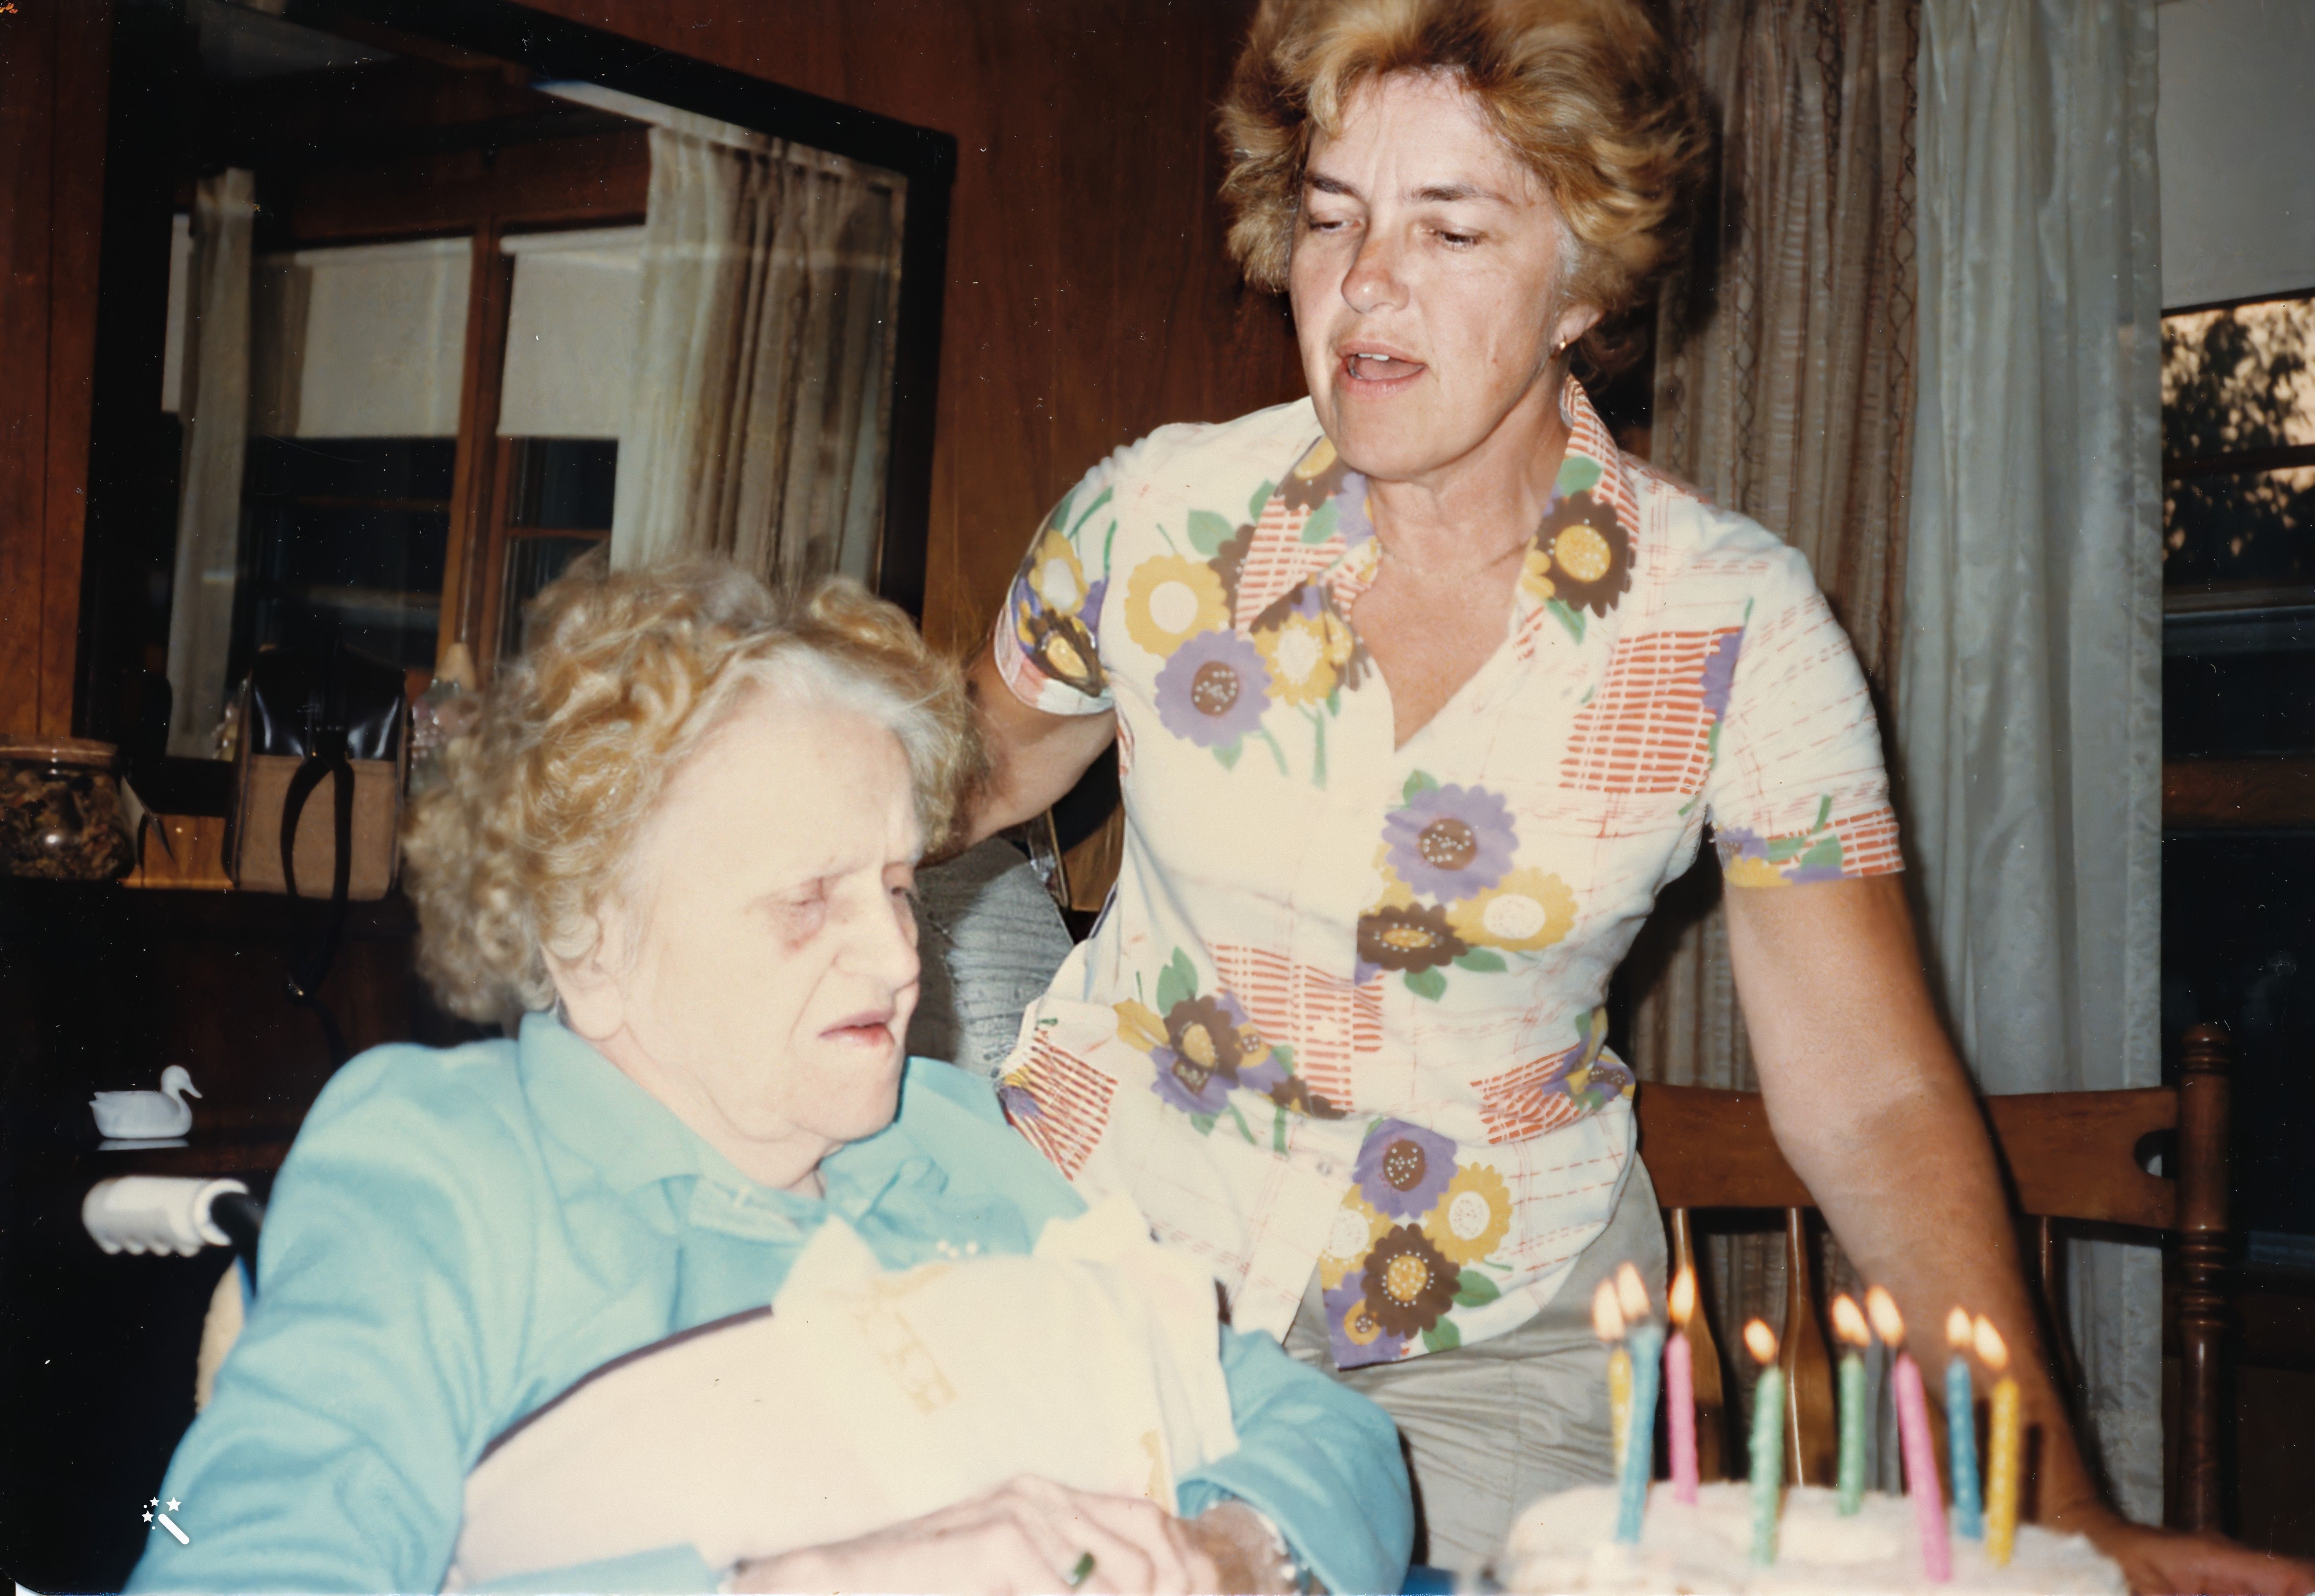 Edith with Arlene blowing out candles